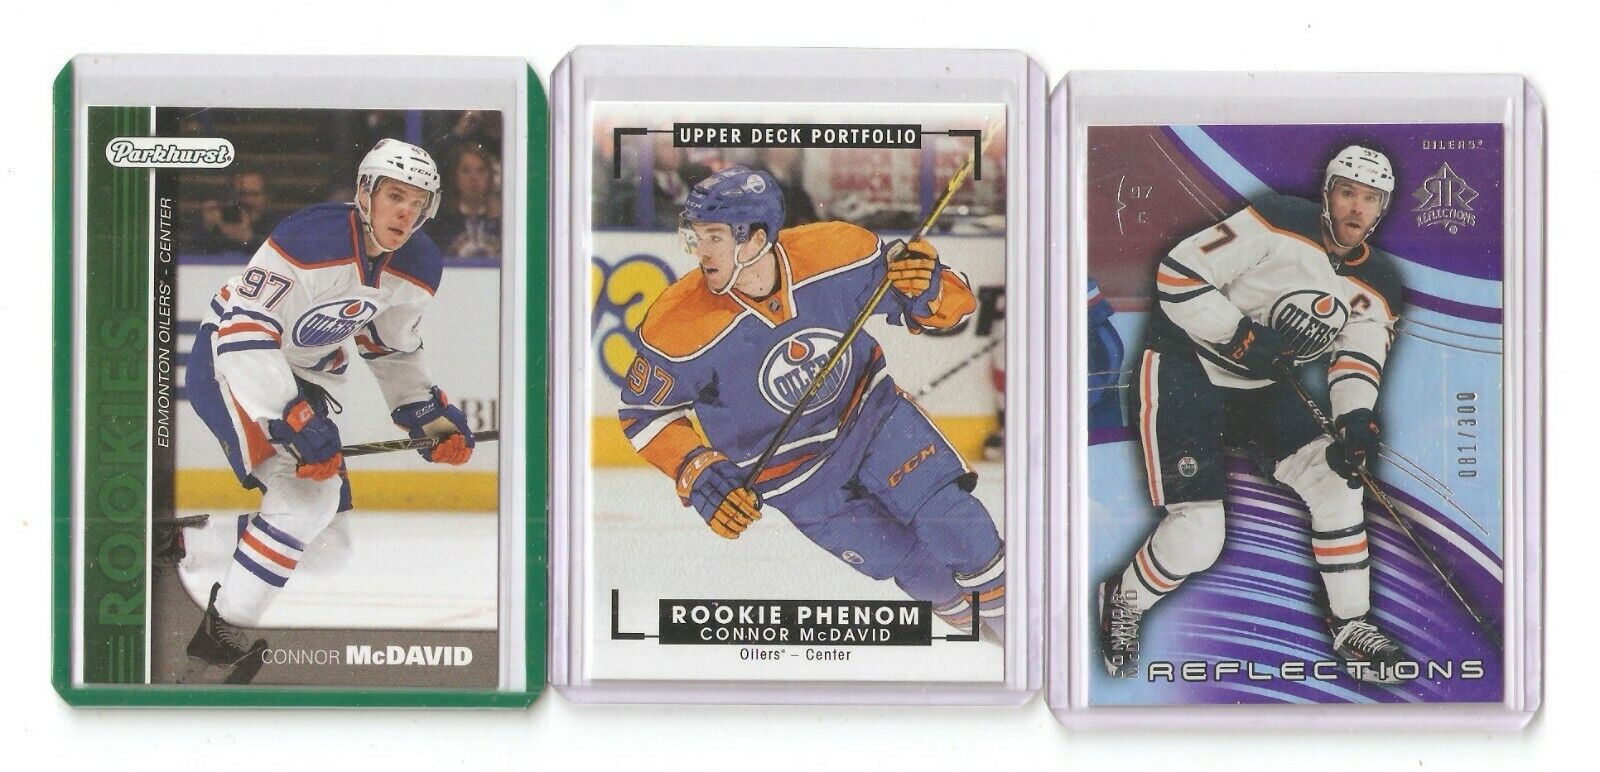 15-16 UD Extended Series Conner McDavid Reflections/300